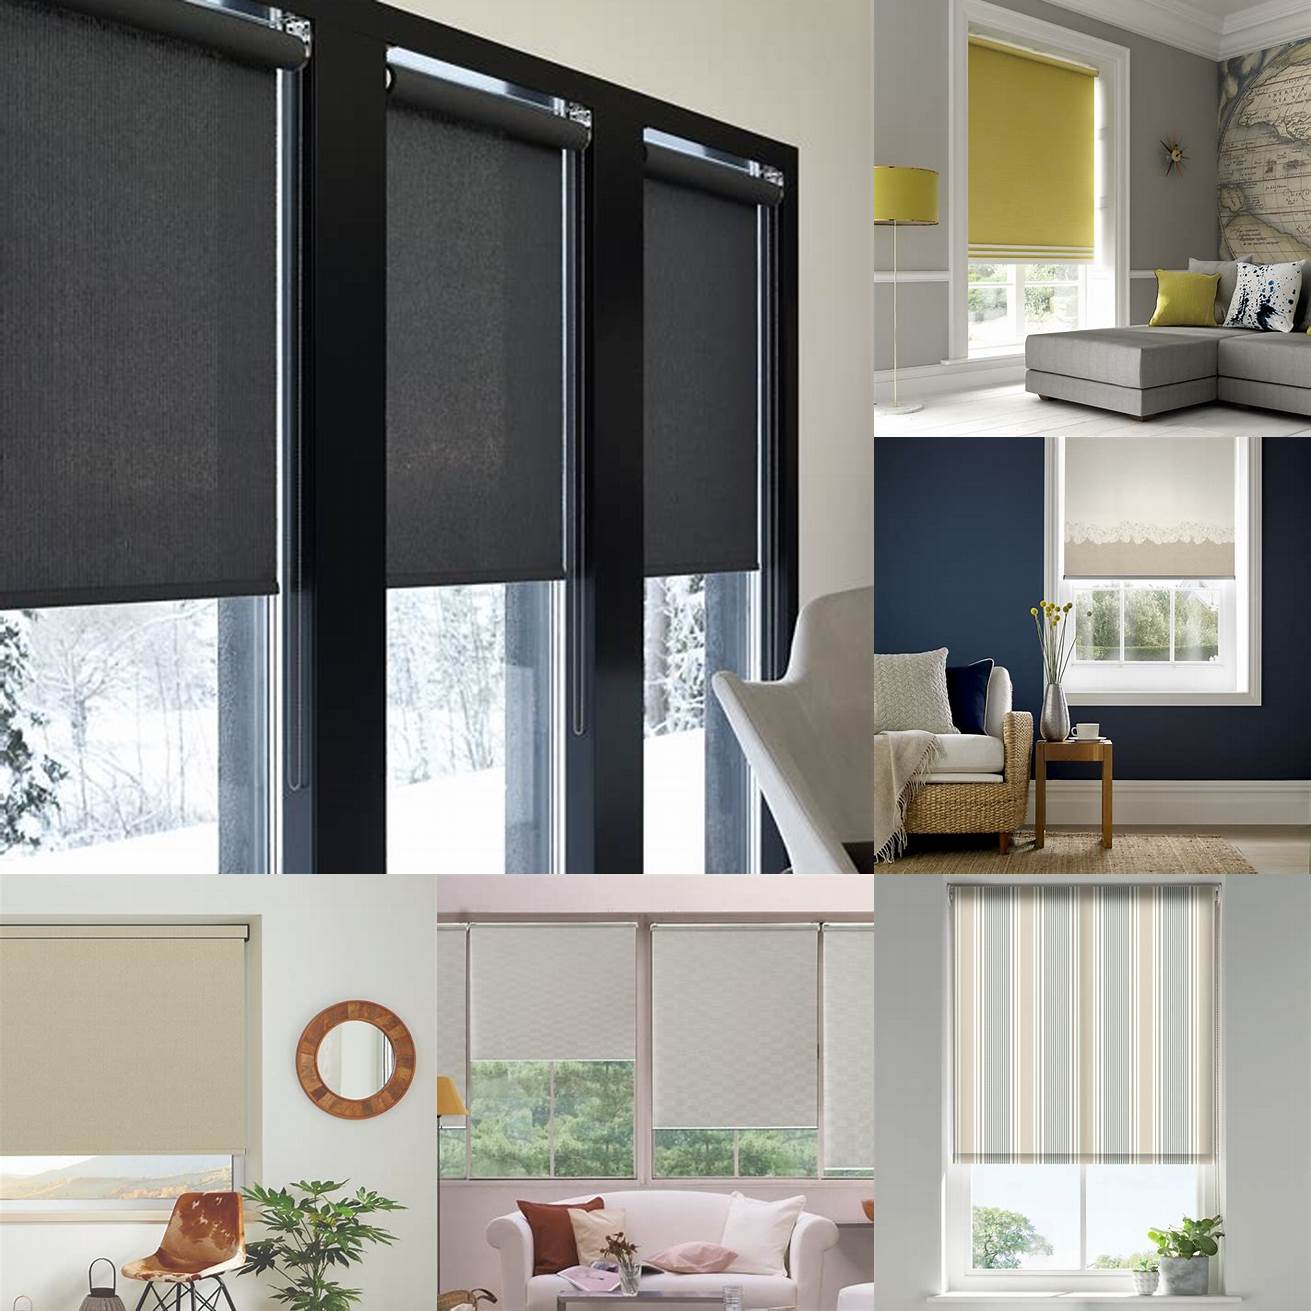 Solid Colors The most classic and versatile option for roller blinds as they match any decor style and create a clean and modern look